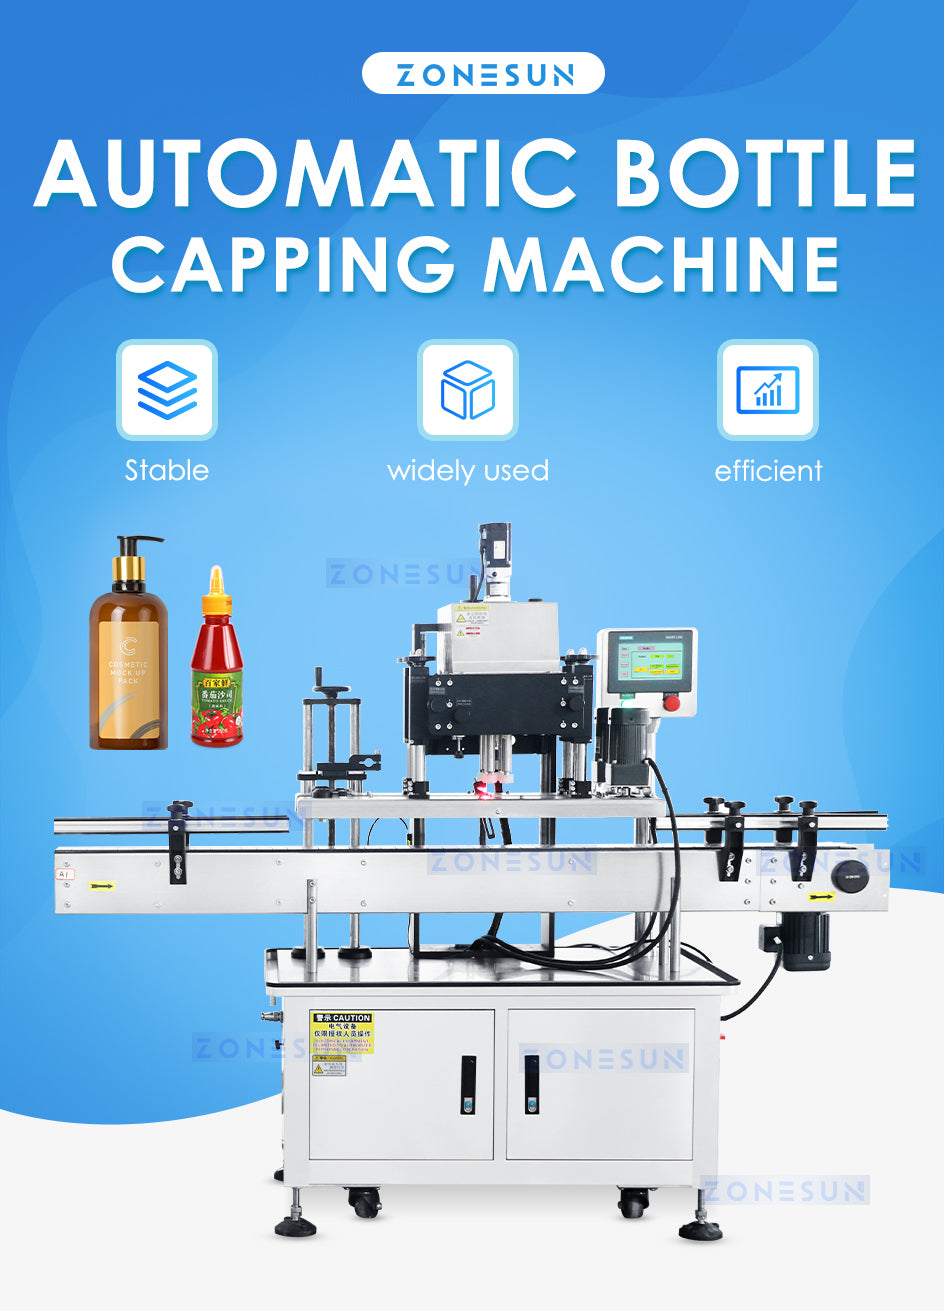 capping machine for bottles